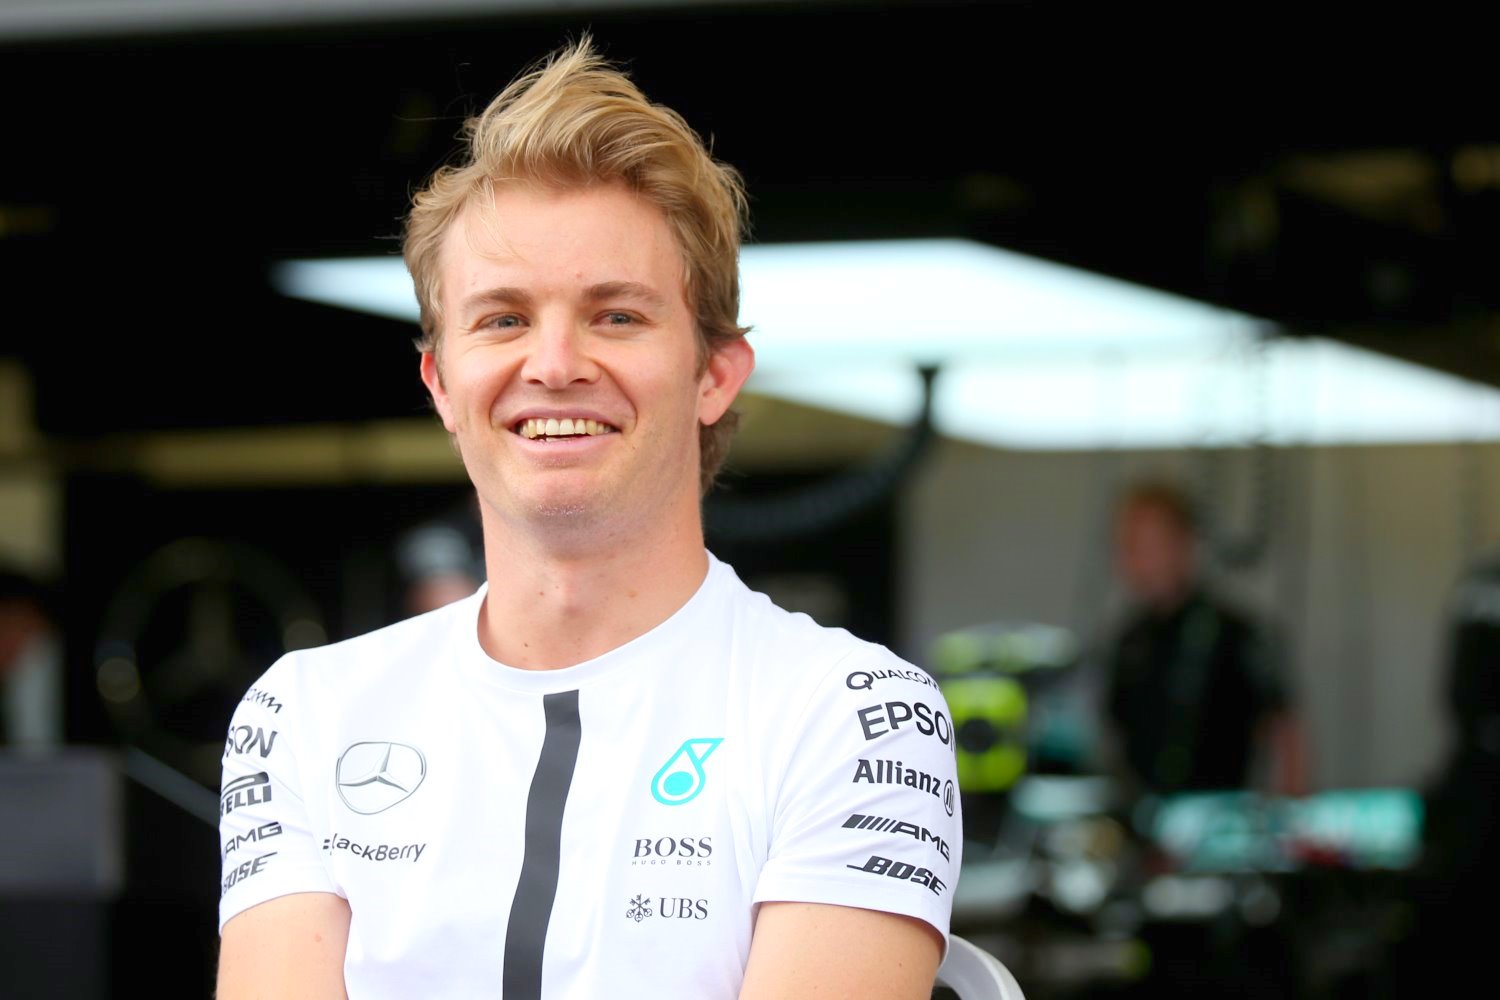 Rosberg does not have the mental fortitude to beat Hamilton